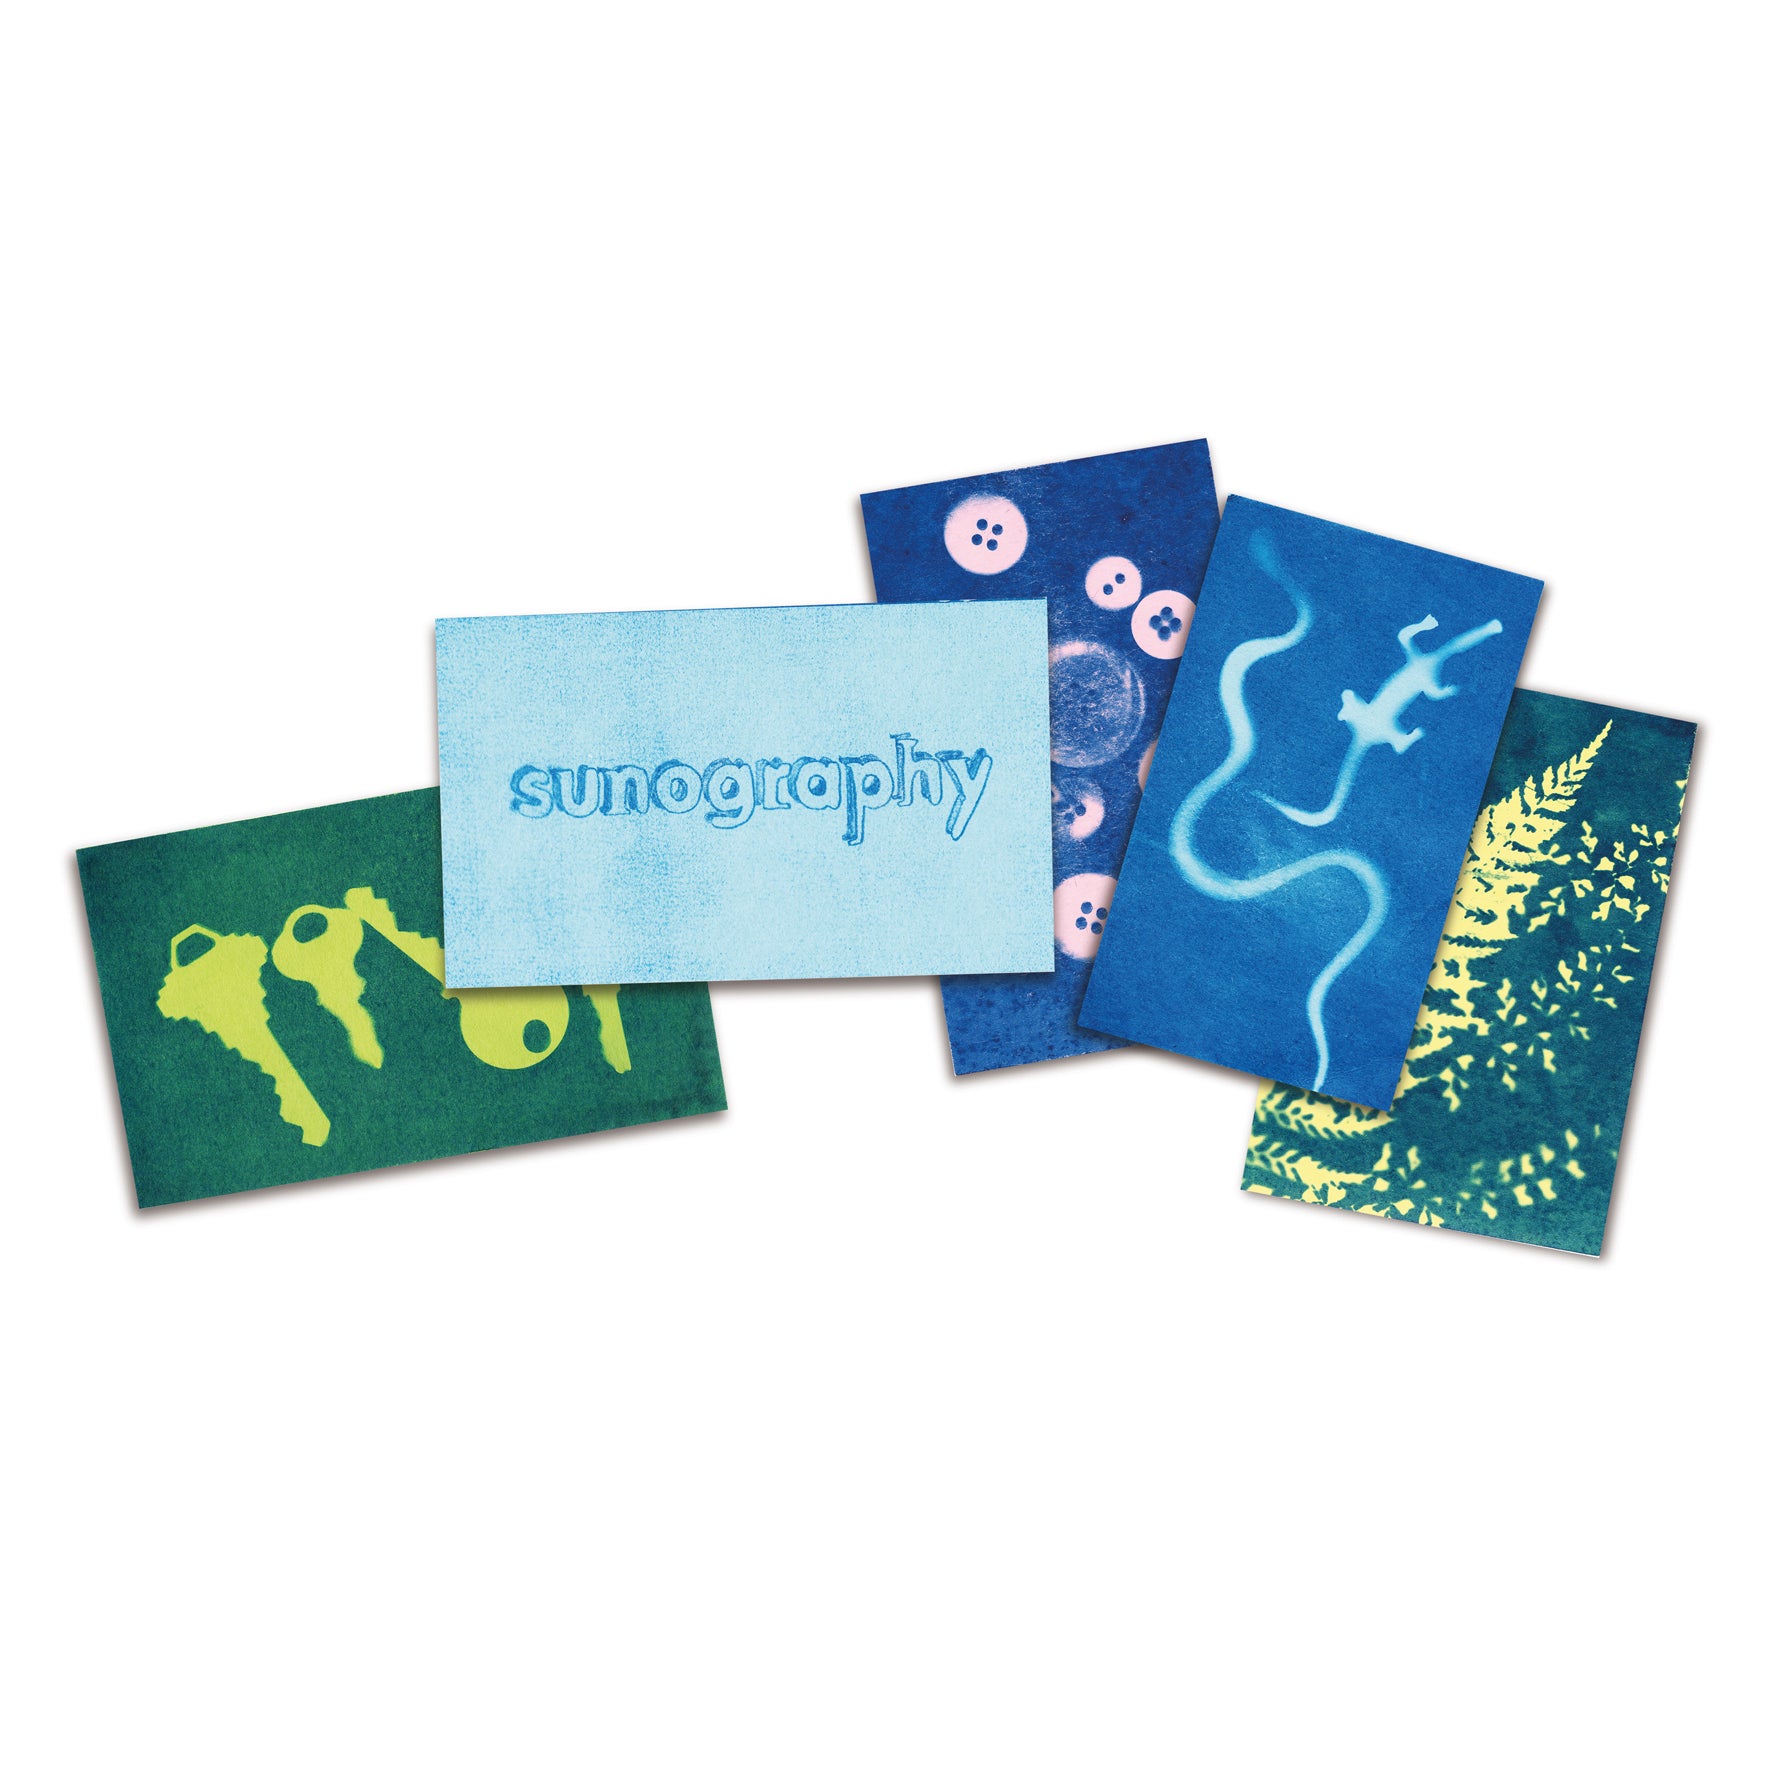 Noted Sunography Color Cards Pack of 5 2